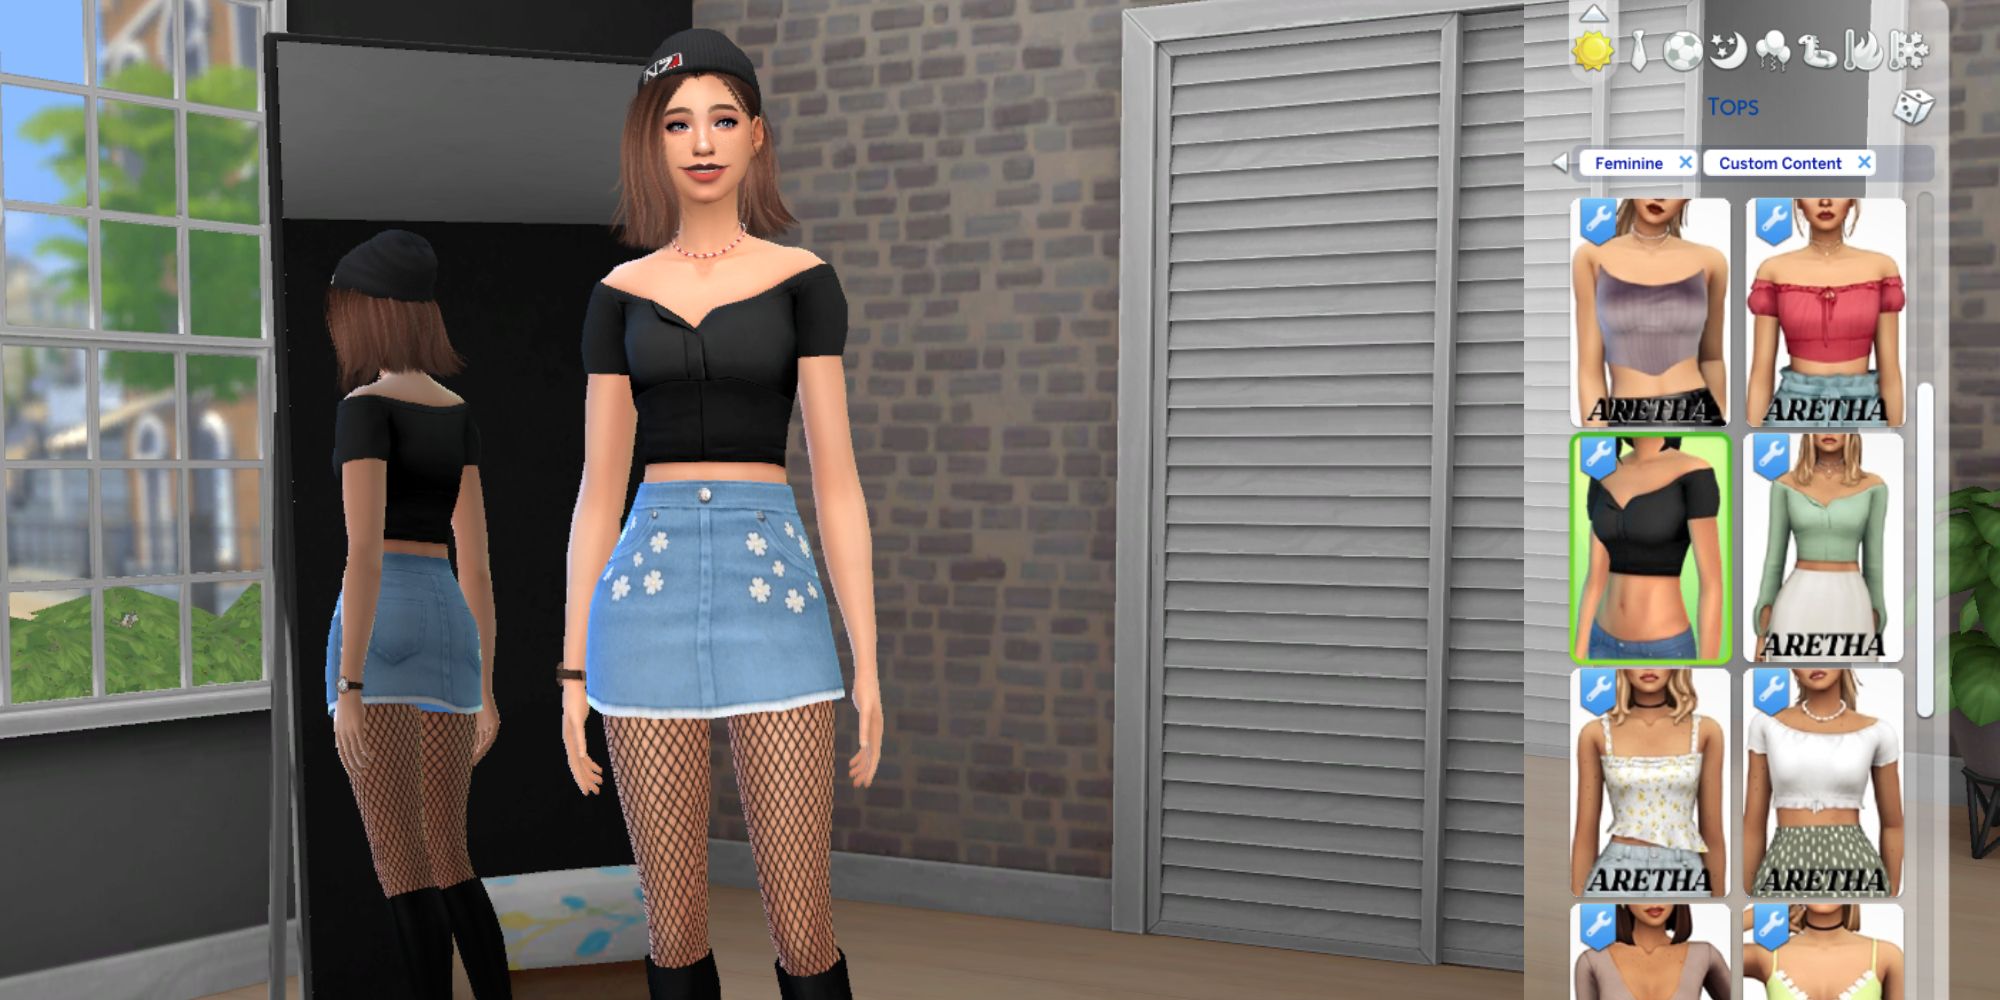 Using custom content, players can make unique Sims unlike their previous same-face syndrome Sims.